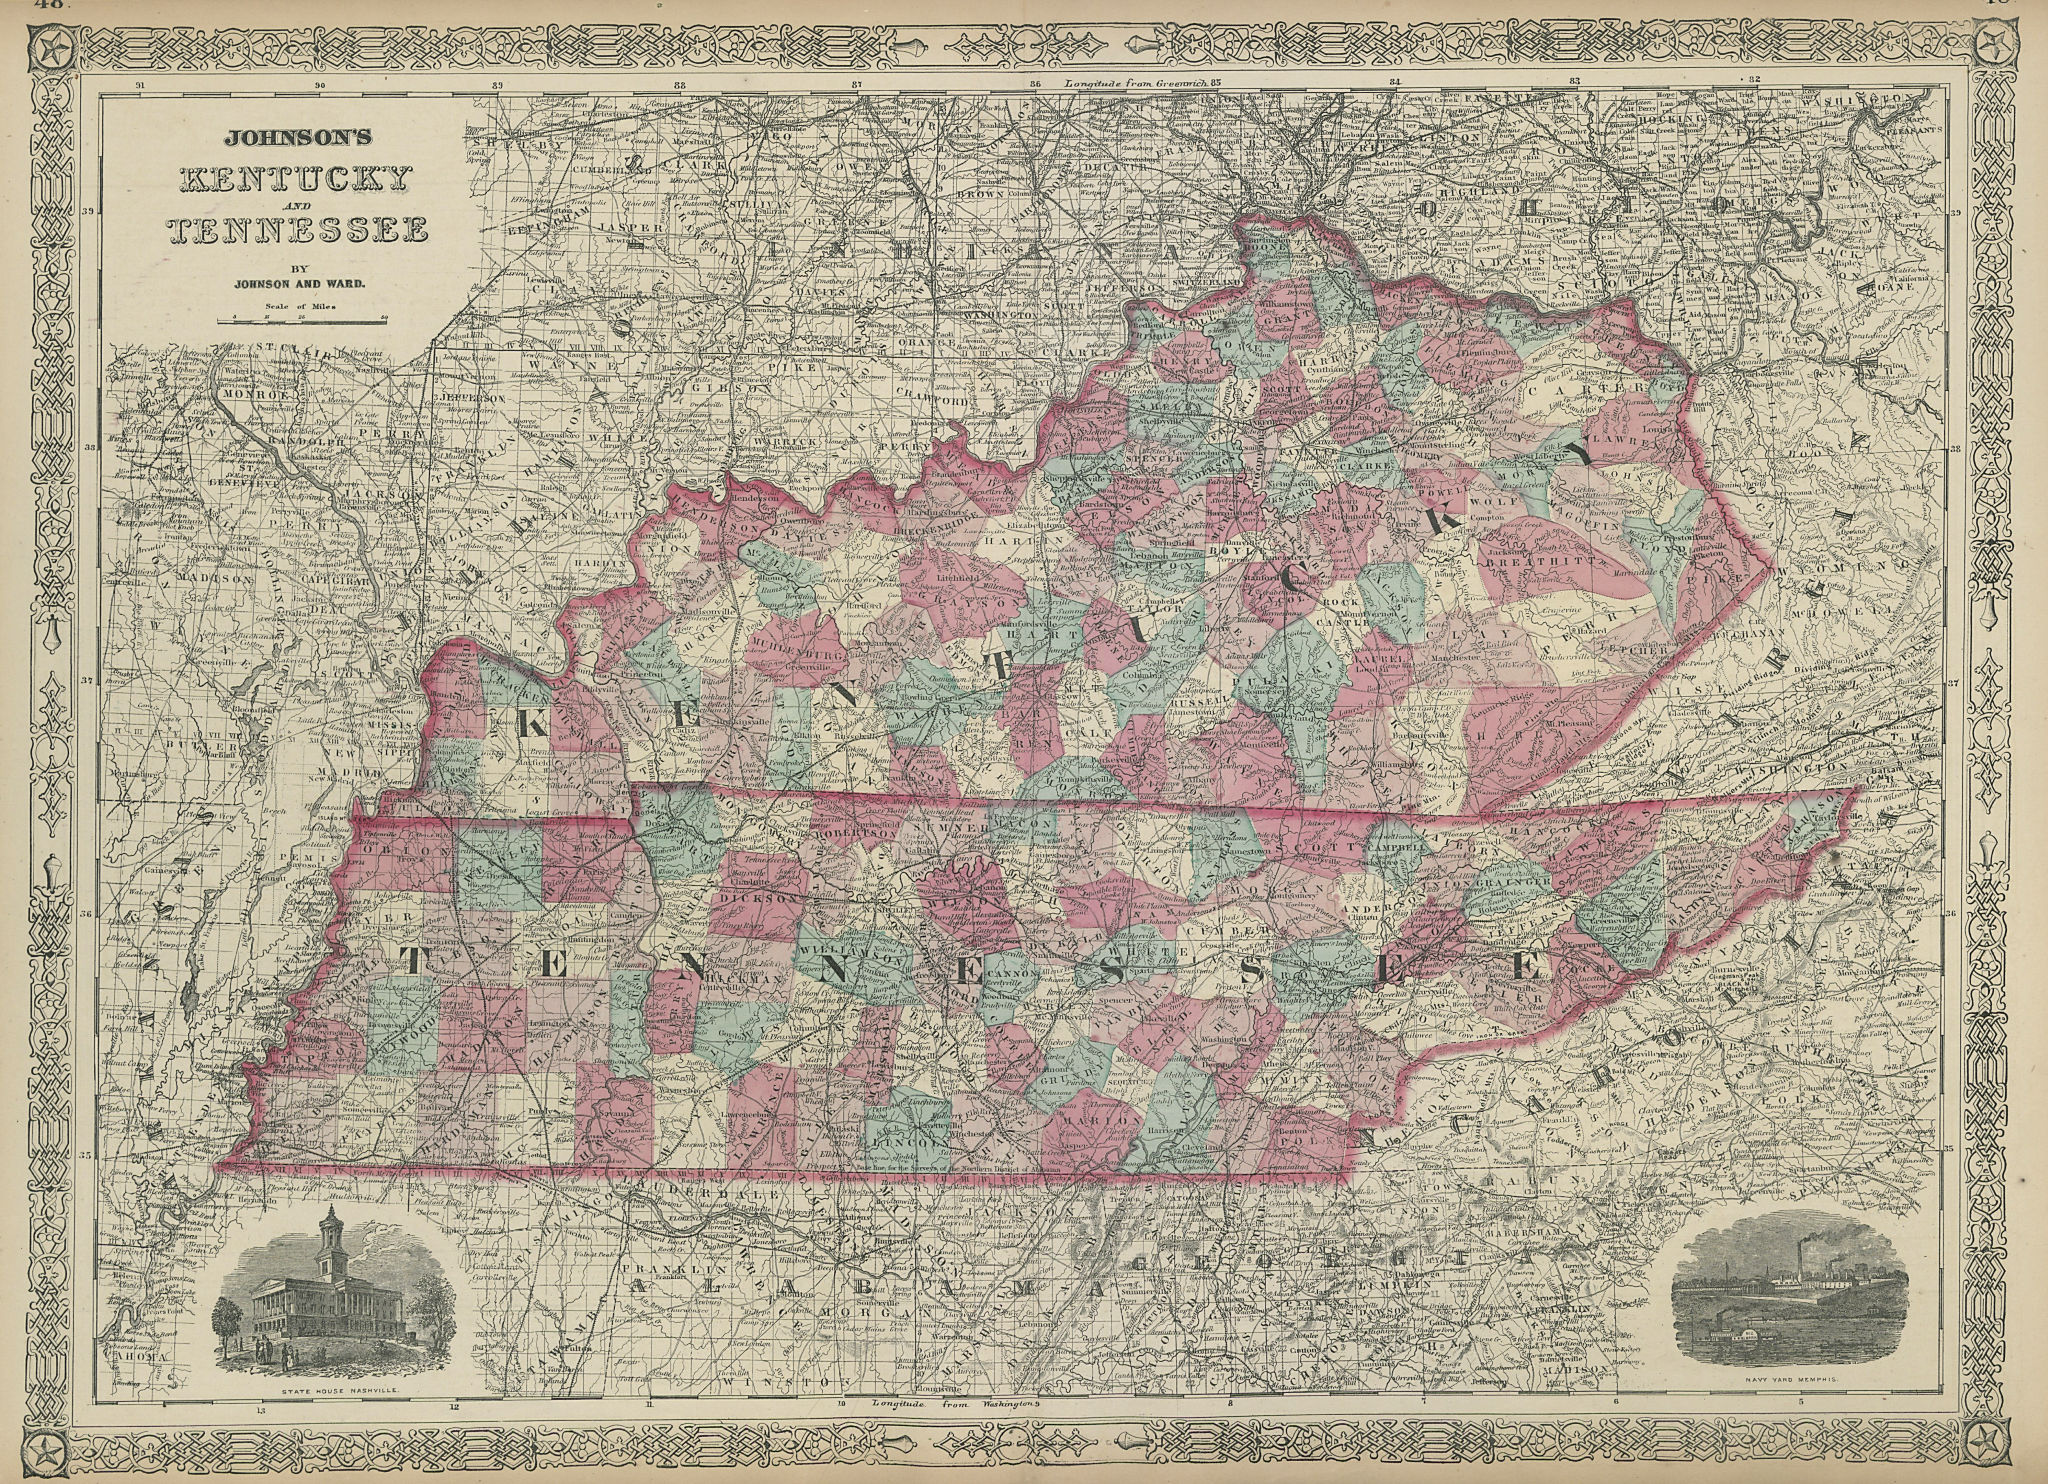 Associate Product Johnson's Kentucky and Tennessee. US state map showing counties 1865 old